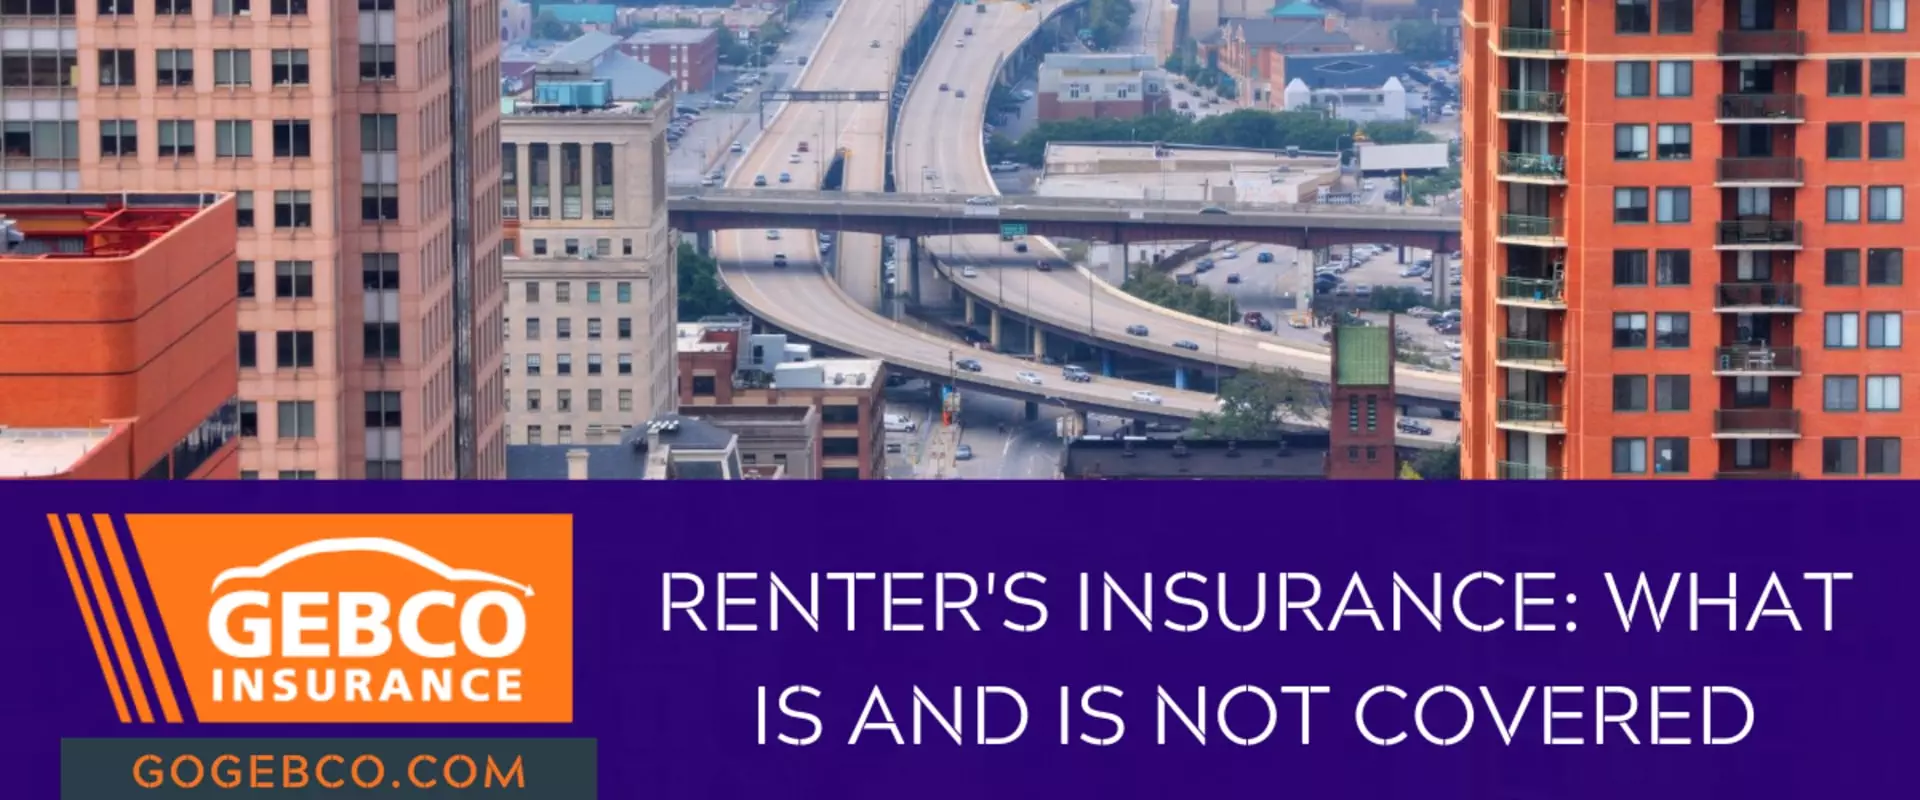 Which two catastrophes are not covered by renter’s or homeowner’s insurance?